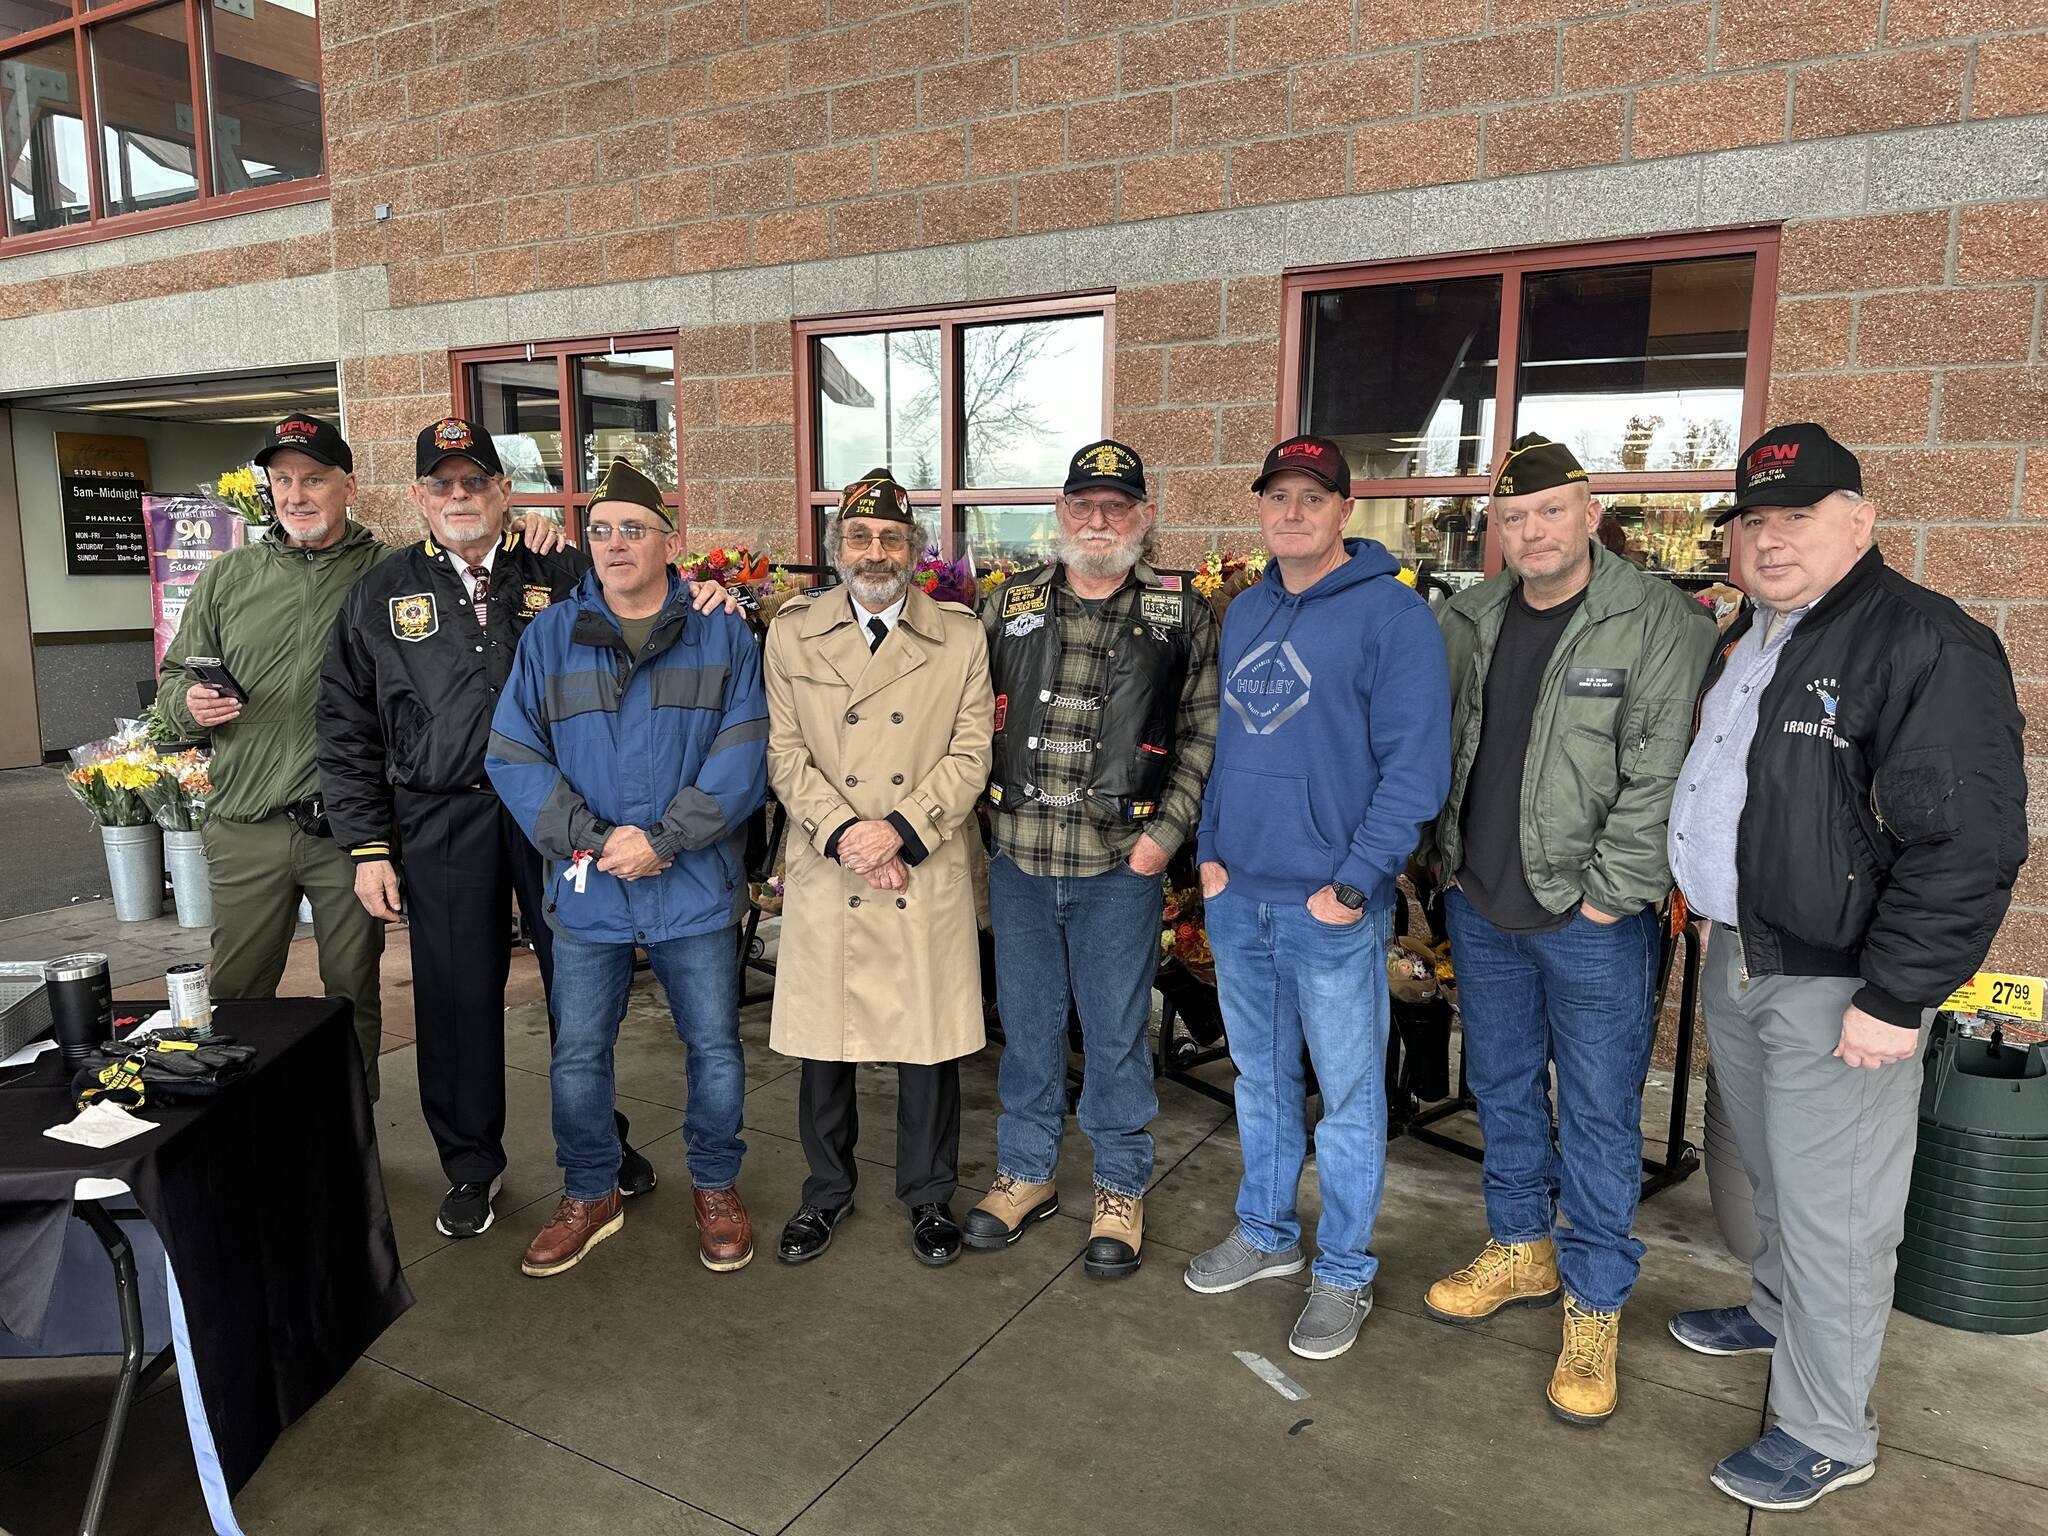 Courtesy photo, Tony Dohse
VFW Post 1741 members who distributed Buddy Poppies to honor veterans living and dead last Saturday in front of Haggen in Lakeland Hills are from left to right: Frank Bannister, Roger Flygare, Derek Dean, Mike Sepal, John Boterf, Tony Dohse, Eric Schlichte and Cory Rueb.